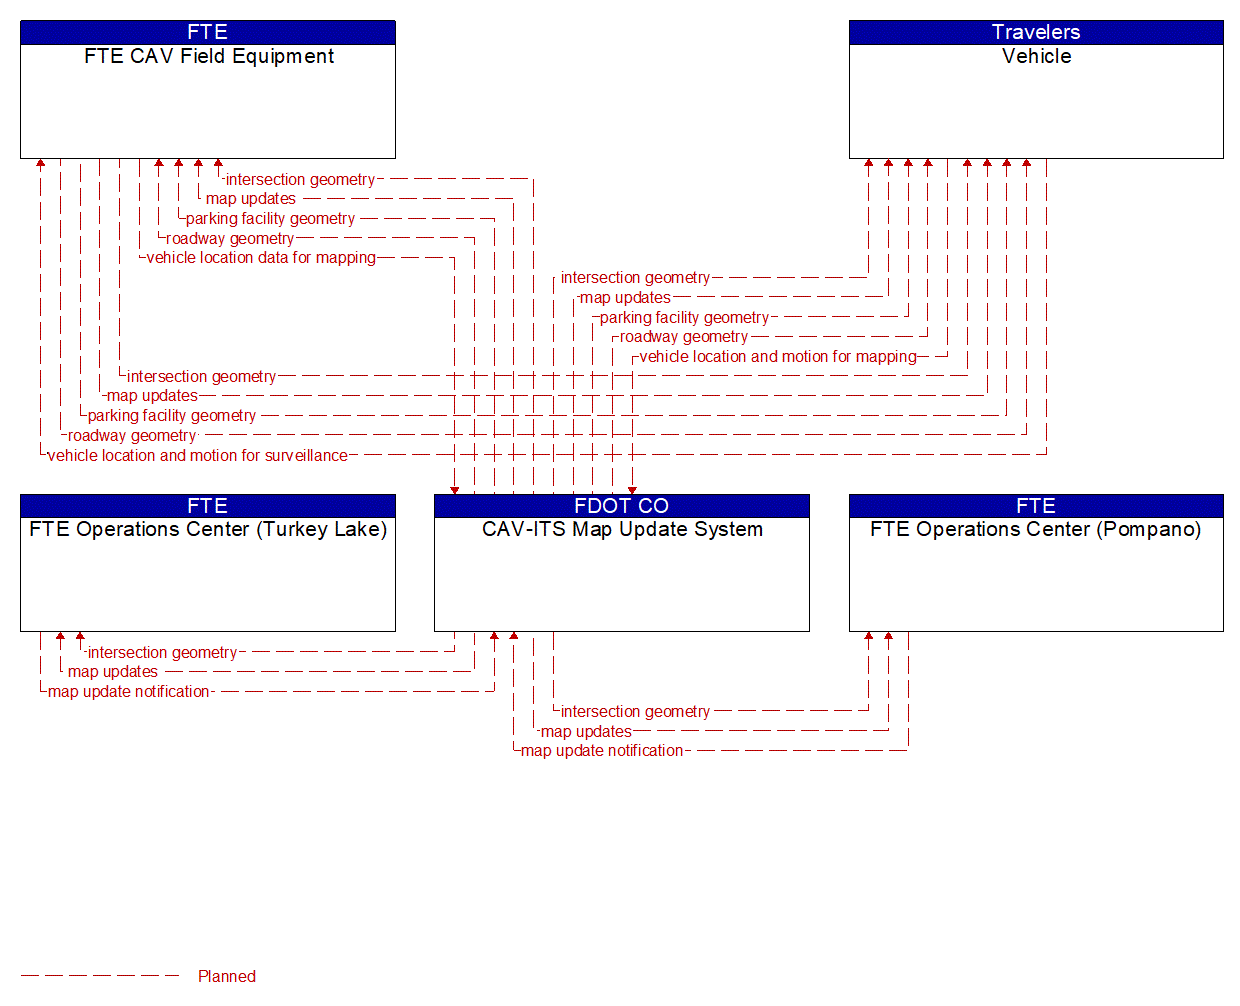 Service Graphic: Map Management (FTE Connected Vehicle)